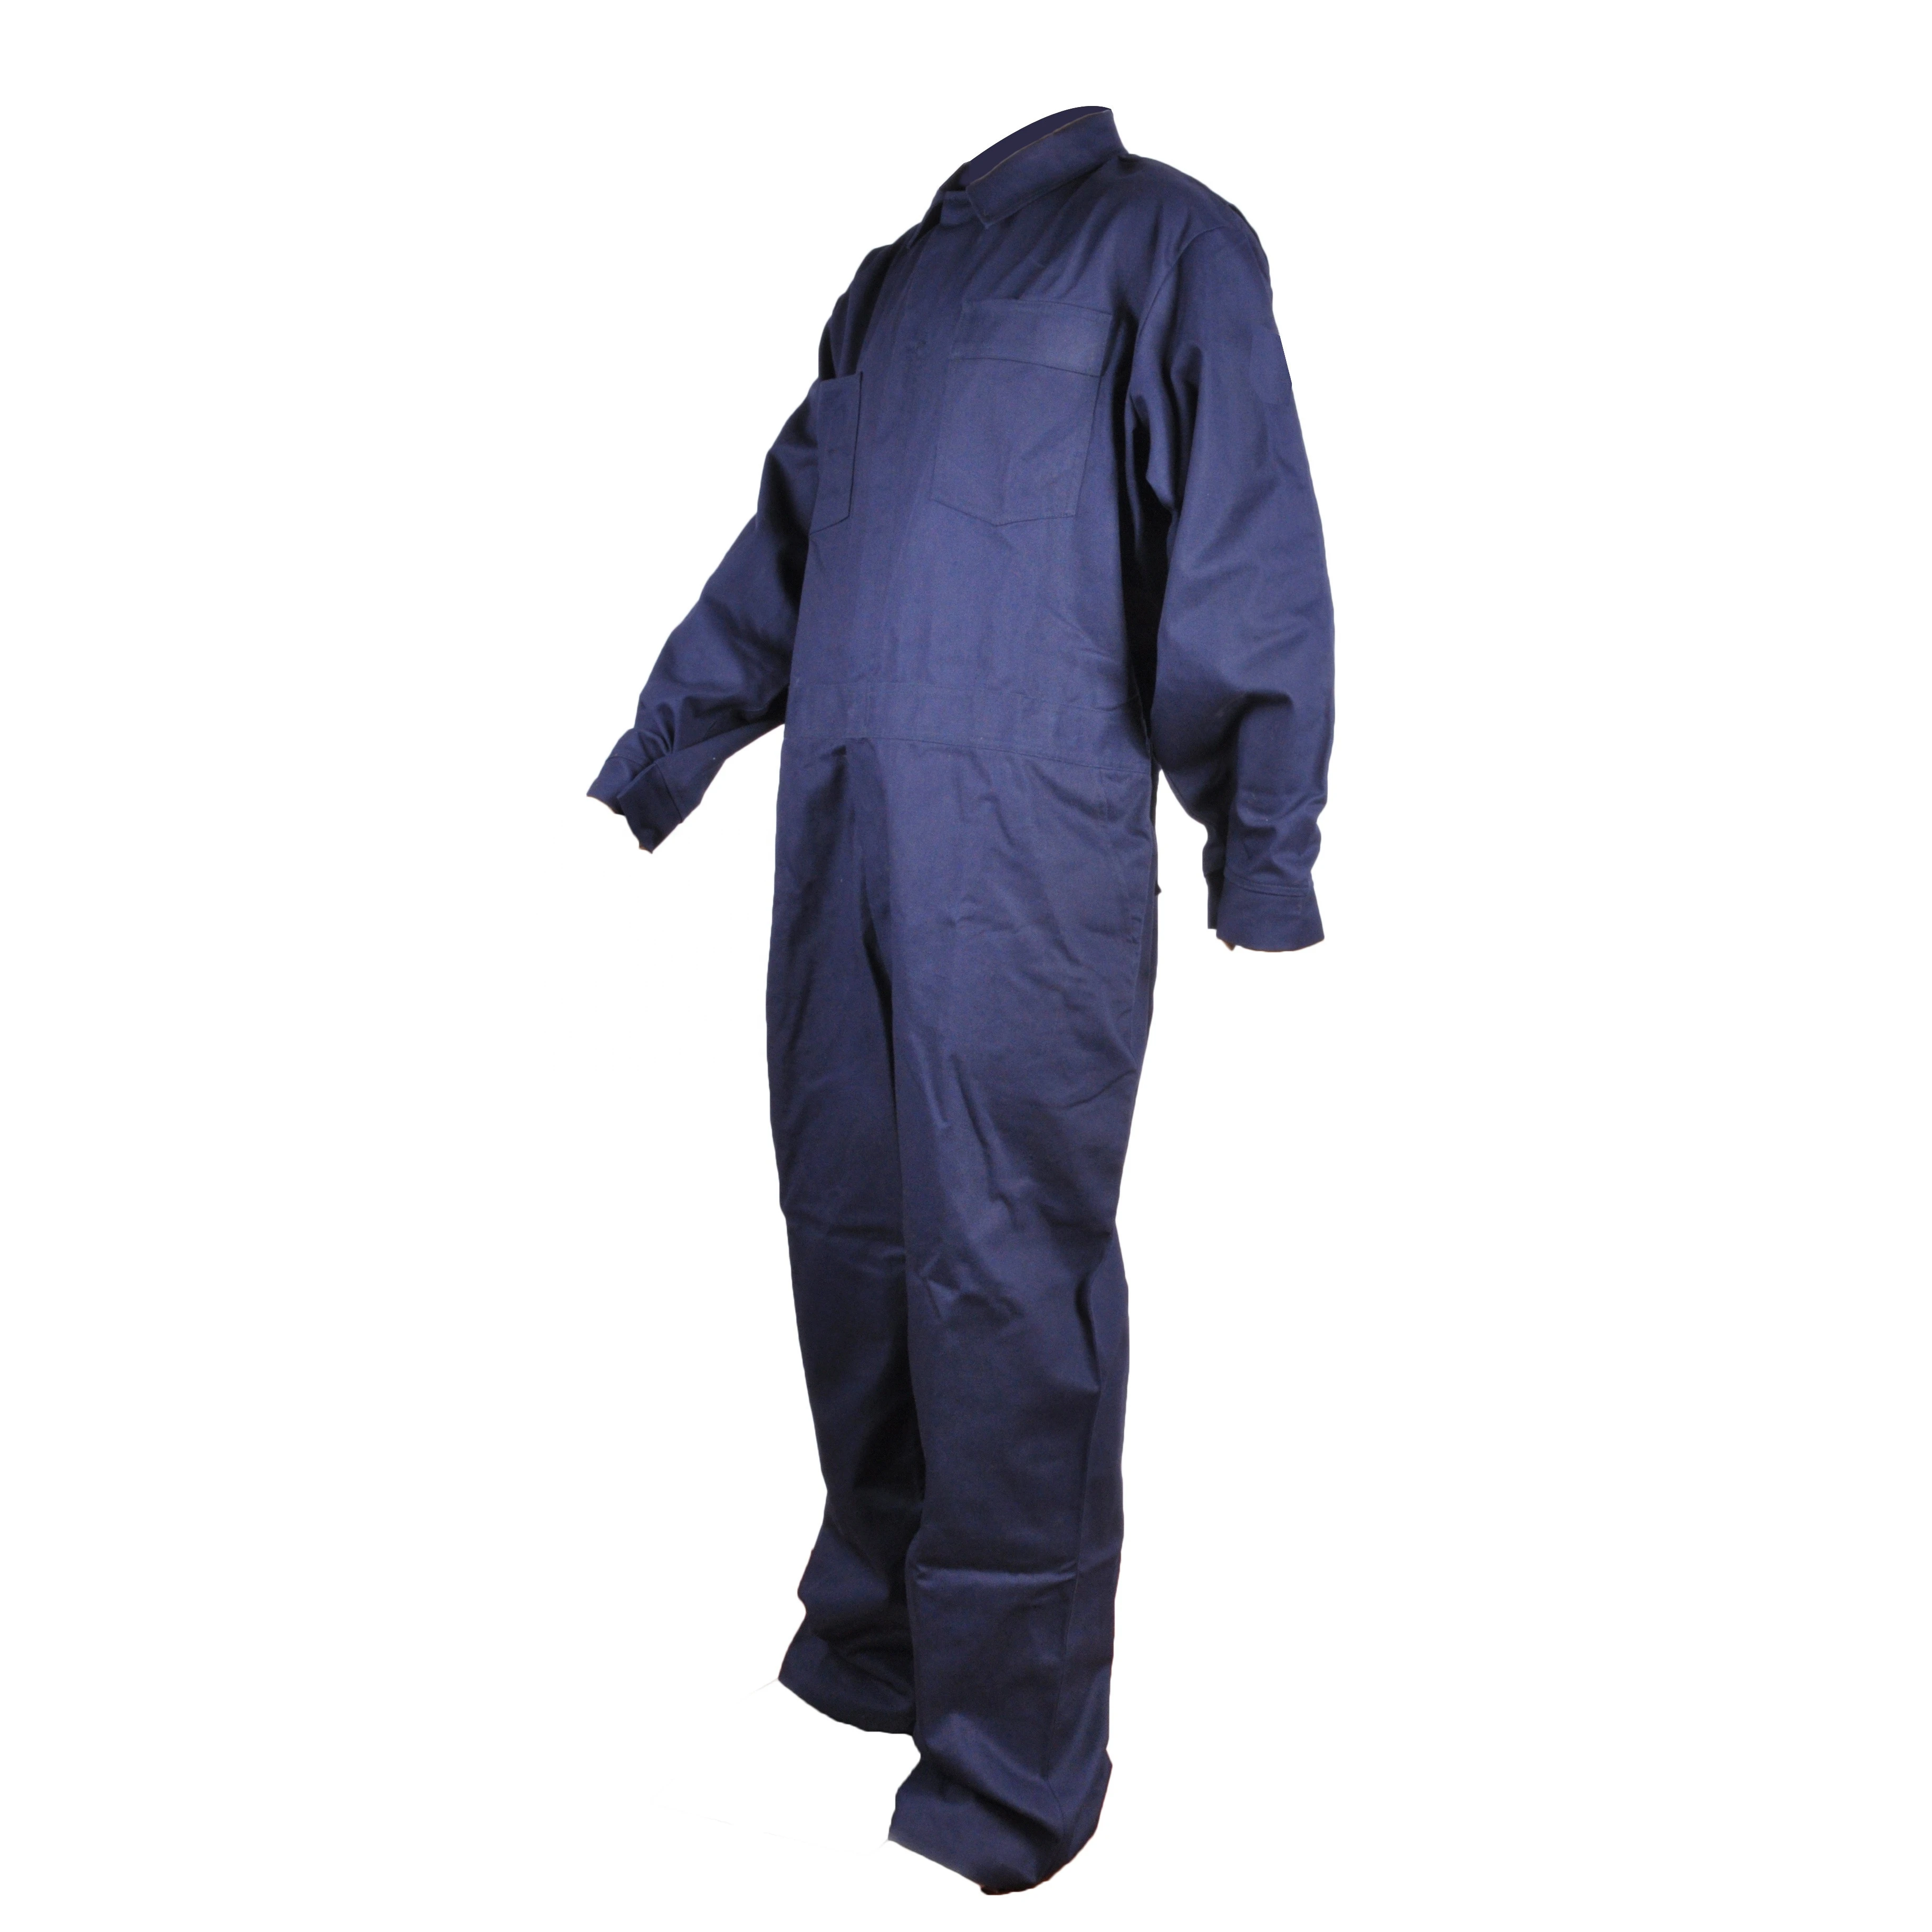 NFPA 70E Arc flash protective welder flame fire resistant frc clothing coverall garments for welding industry